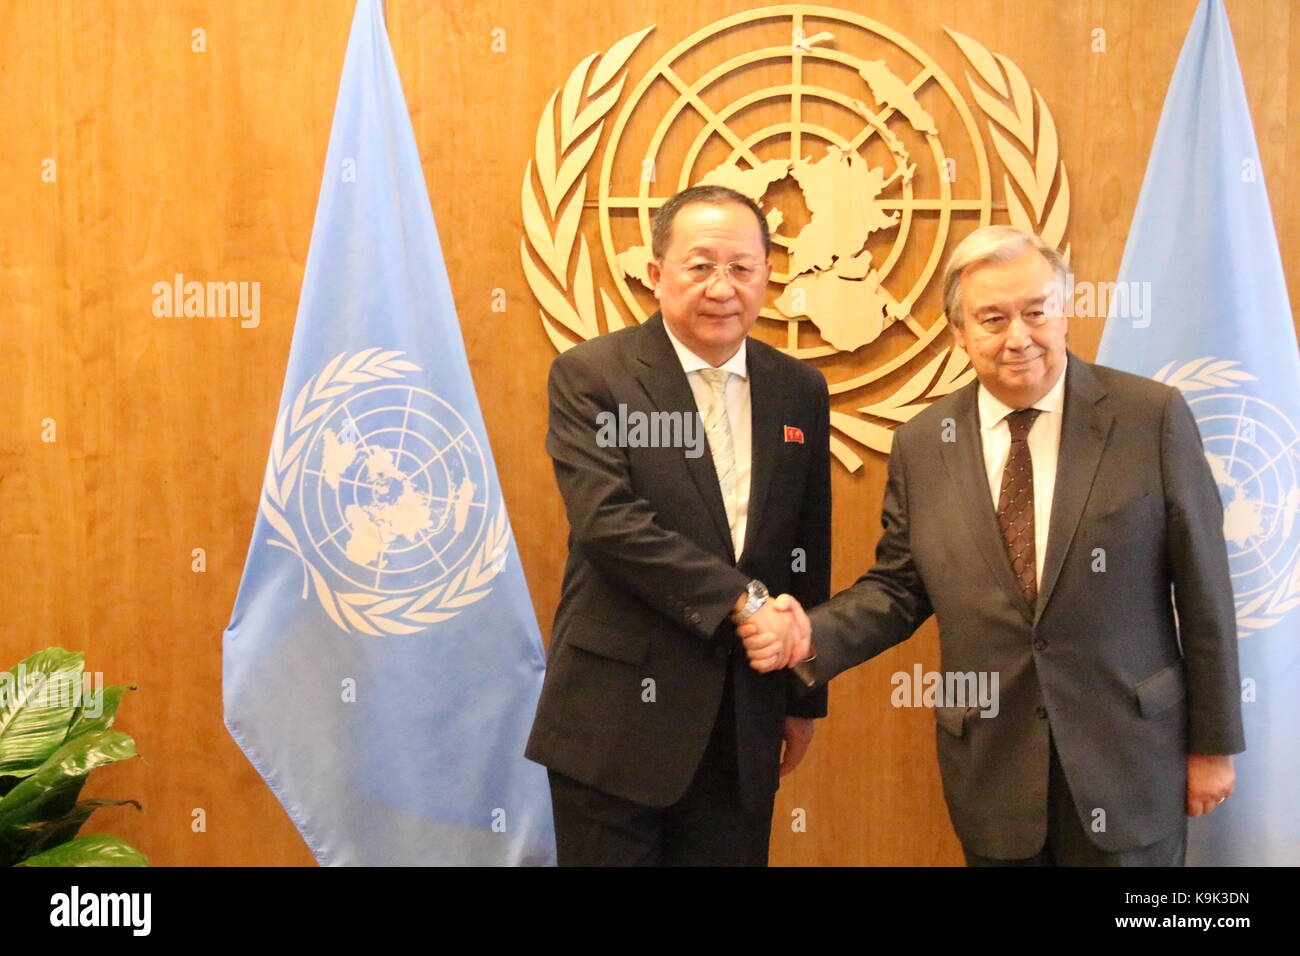 UN, New York, USA. 23rd Sept, 2017. North Korea's Foreign Minister Ri Yong Ho met UN Sec-Gen Antonio Guterres amid mounting tensions on the Korea Peninsula. Photo: Matthew Russell Lee / Inner City Press Stock Photo